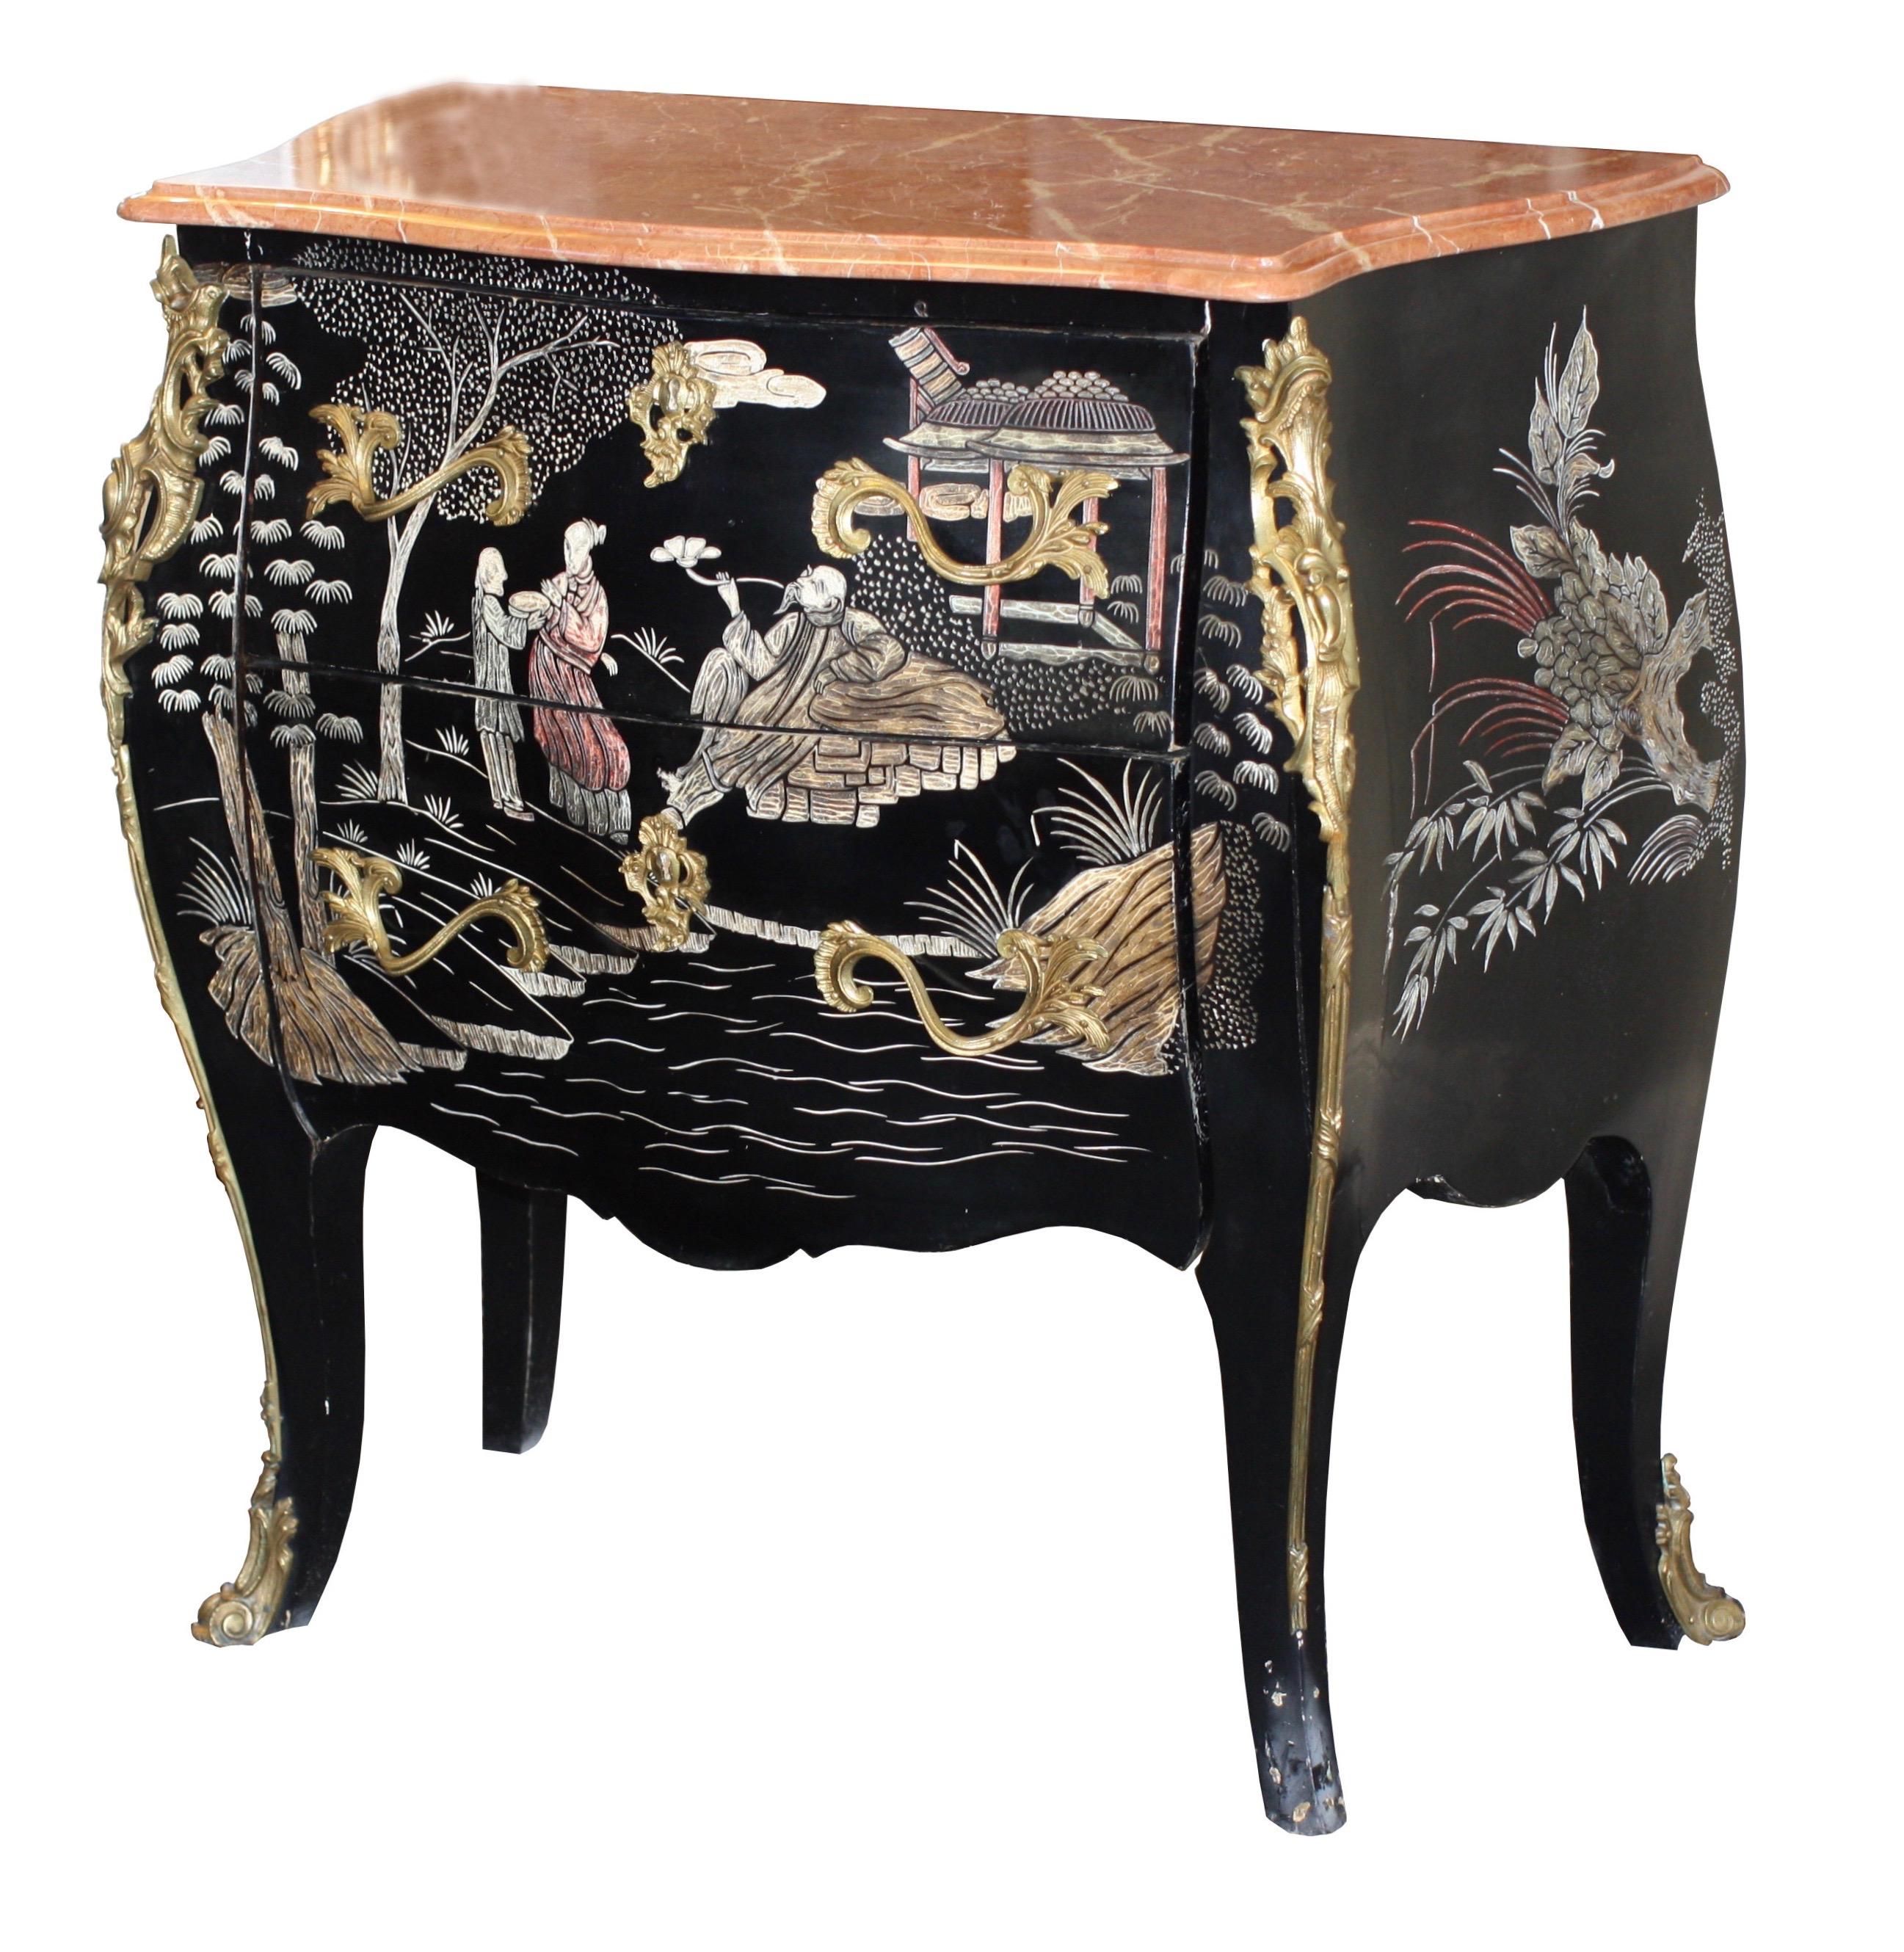 A pair of gilt bronze-mounted black and polychrome lacquered chinoiserie commodes,
of a concave serpentine form with marble tops above two serpentine long drawers with a shaped apron on cabriole legs terminating in gilt bronze scrolled feet, the